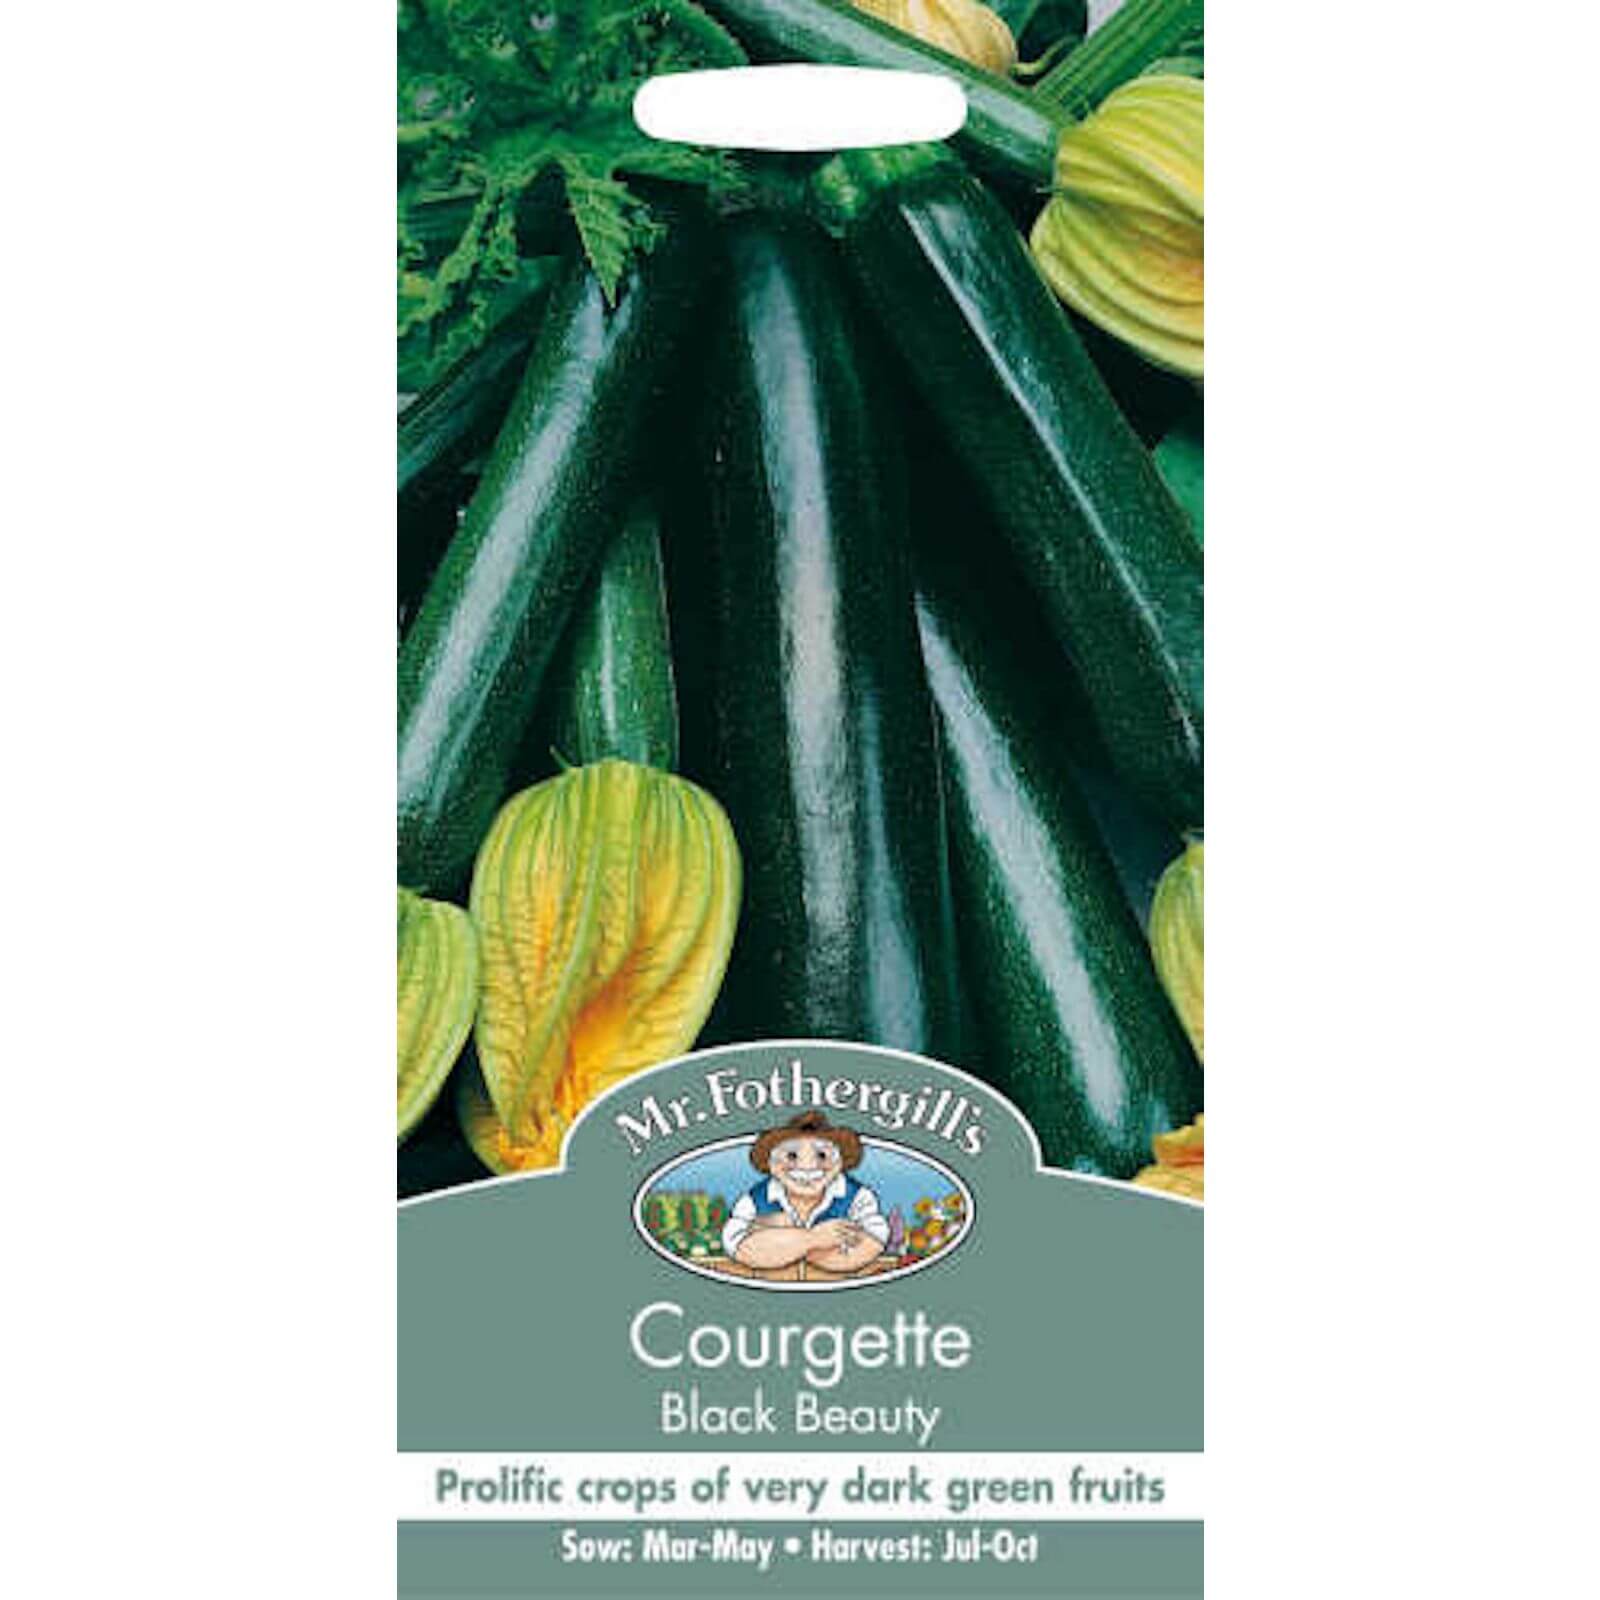 Mr. Fothergill's Courgette Black Beauty Seeds